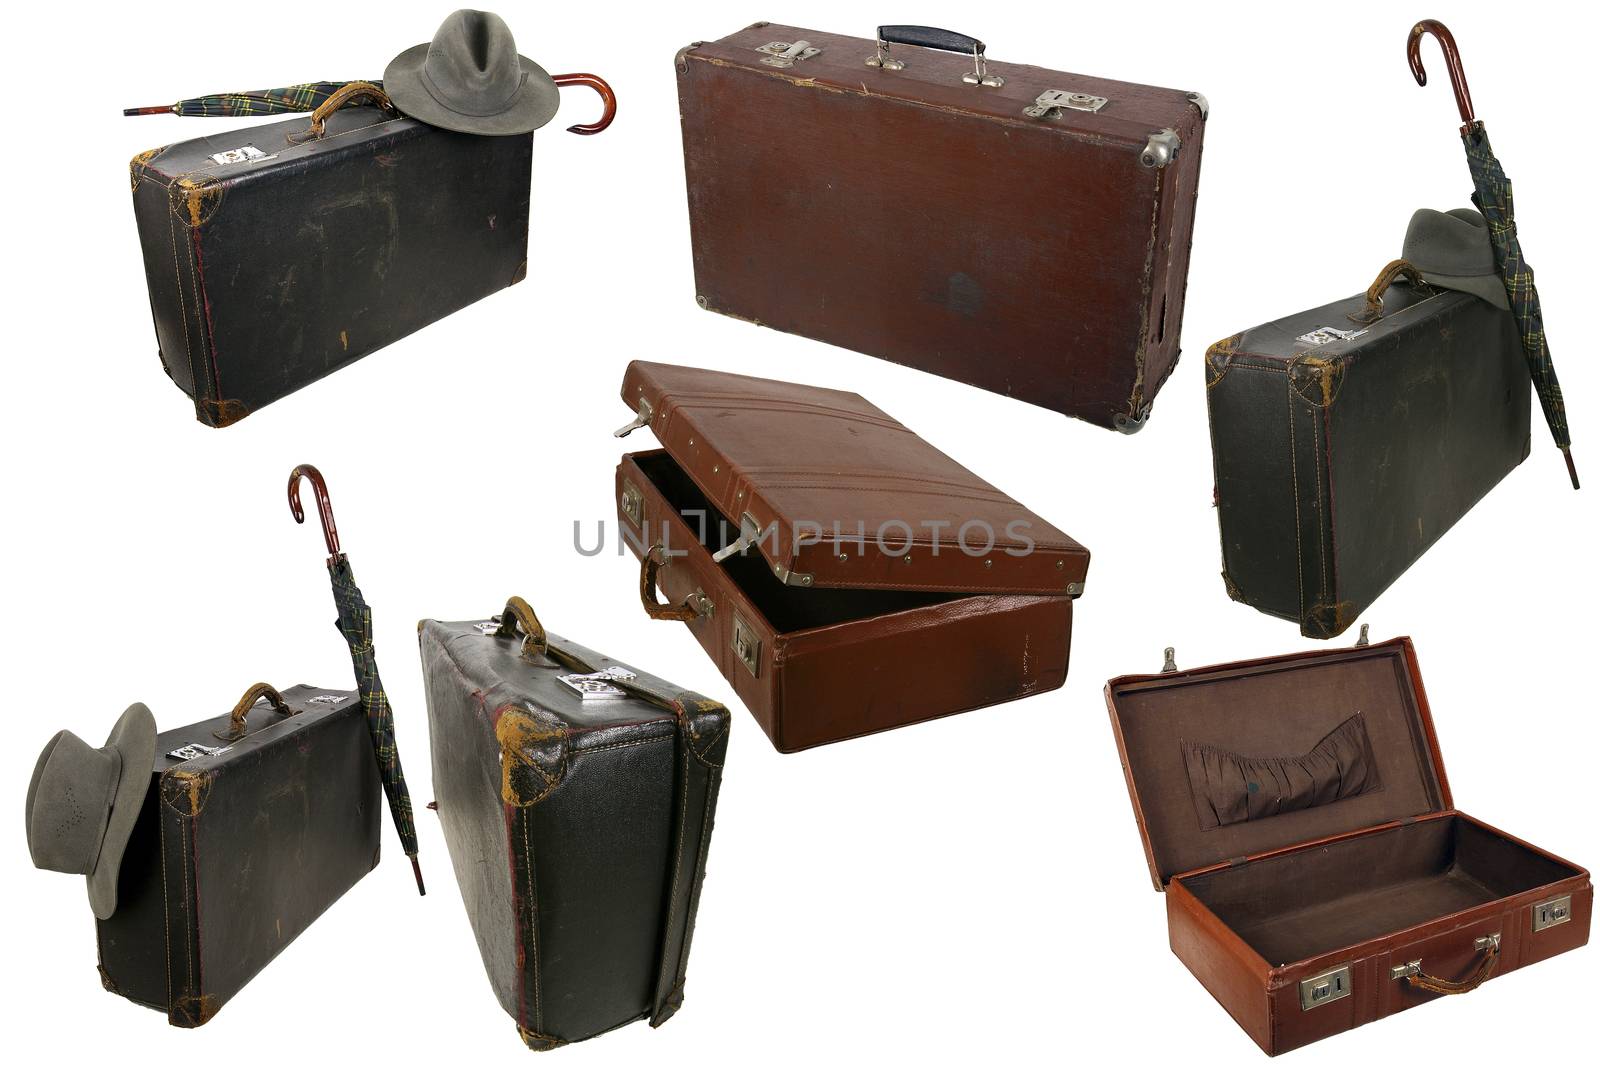 Old brown suitcase on a light background